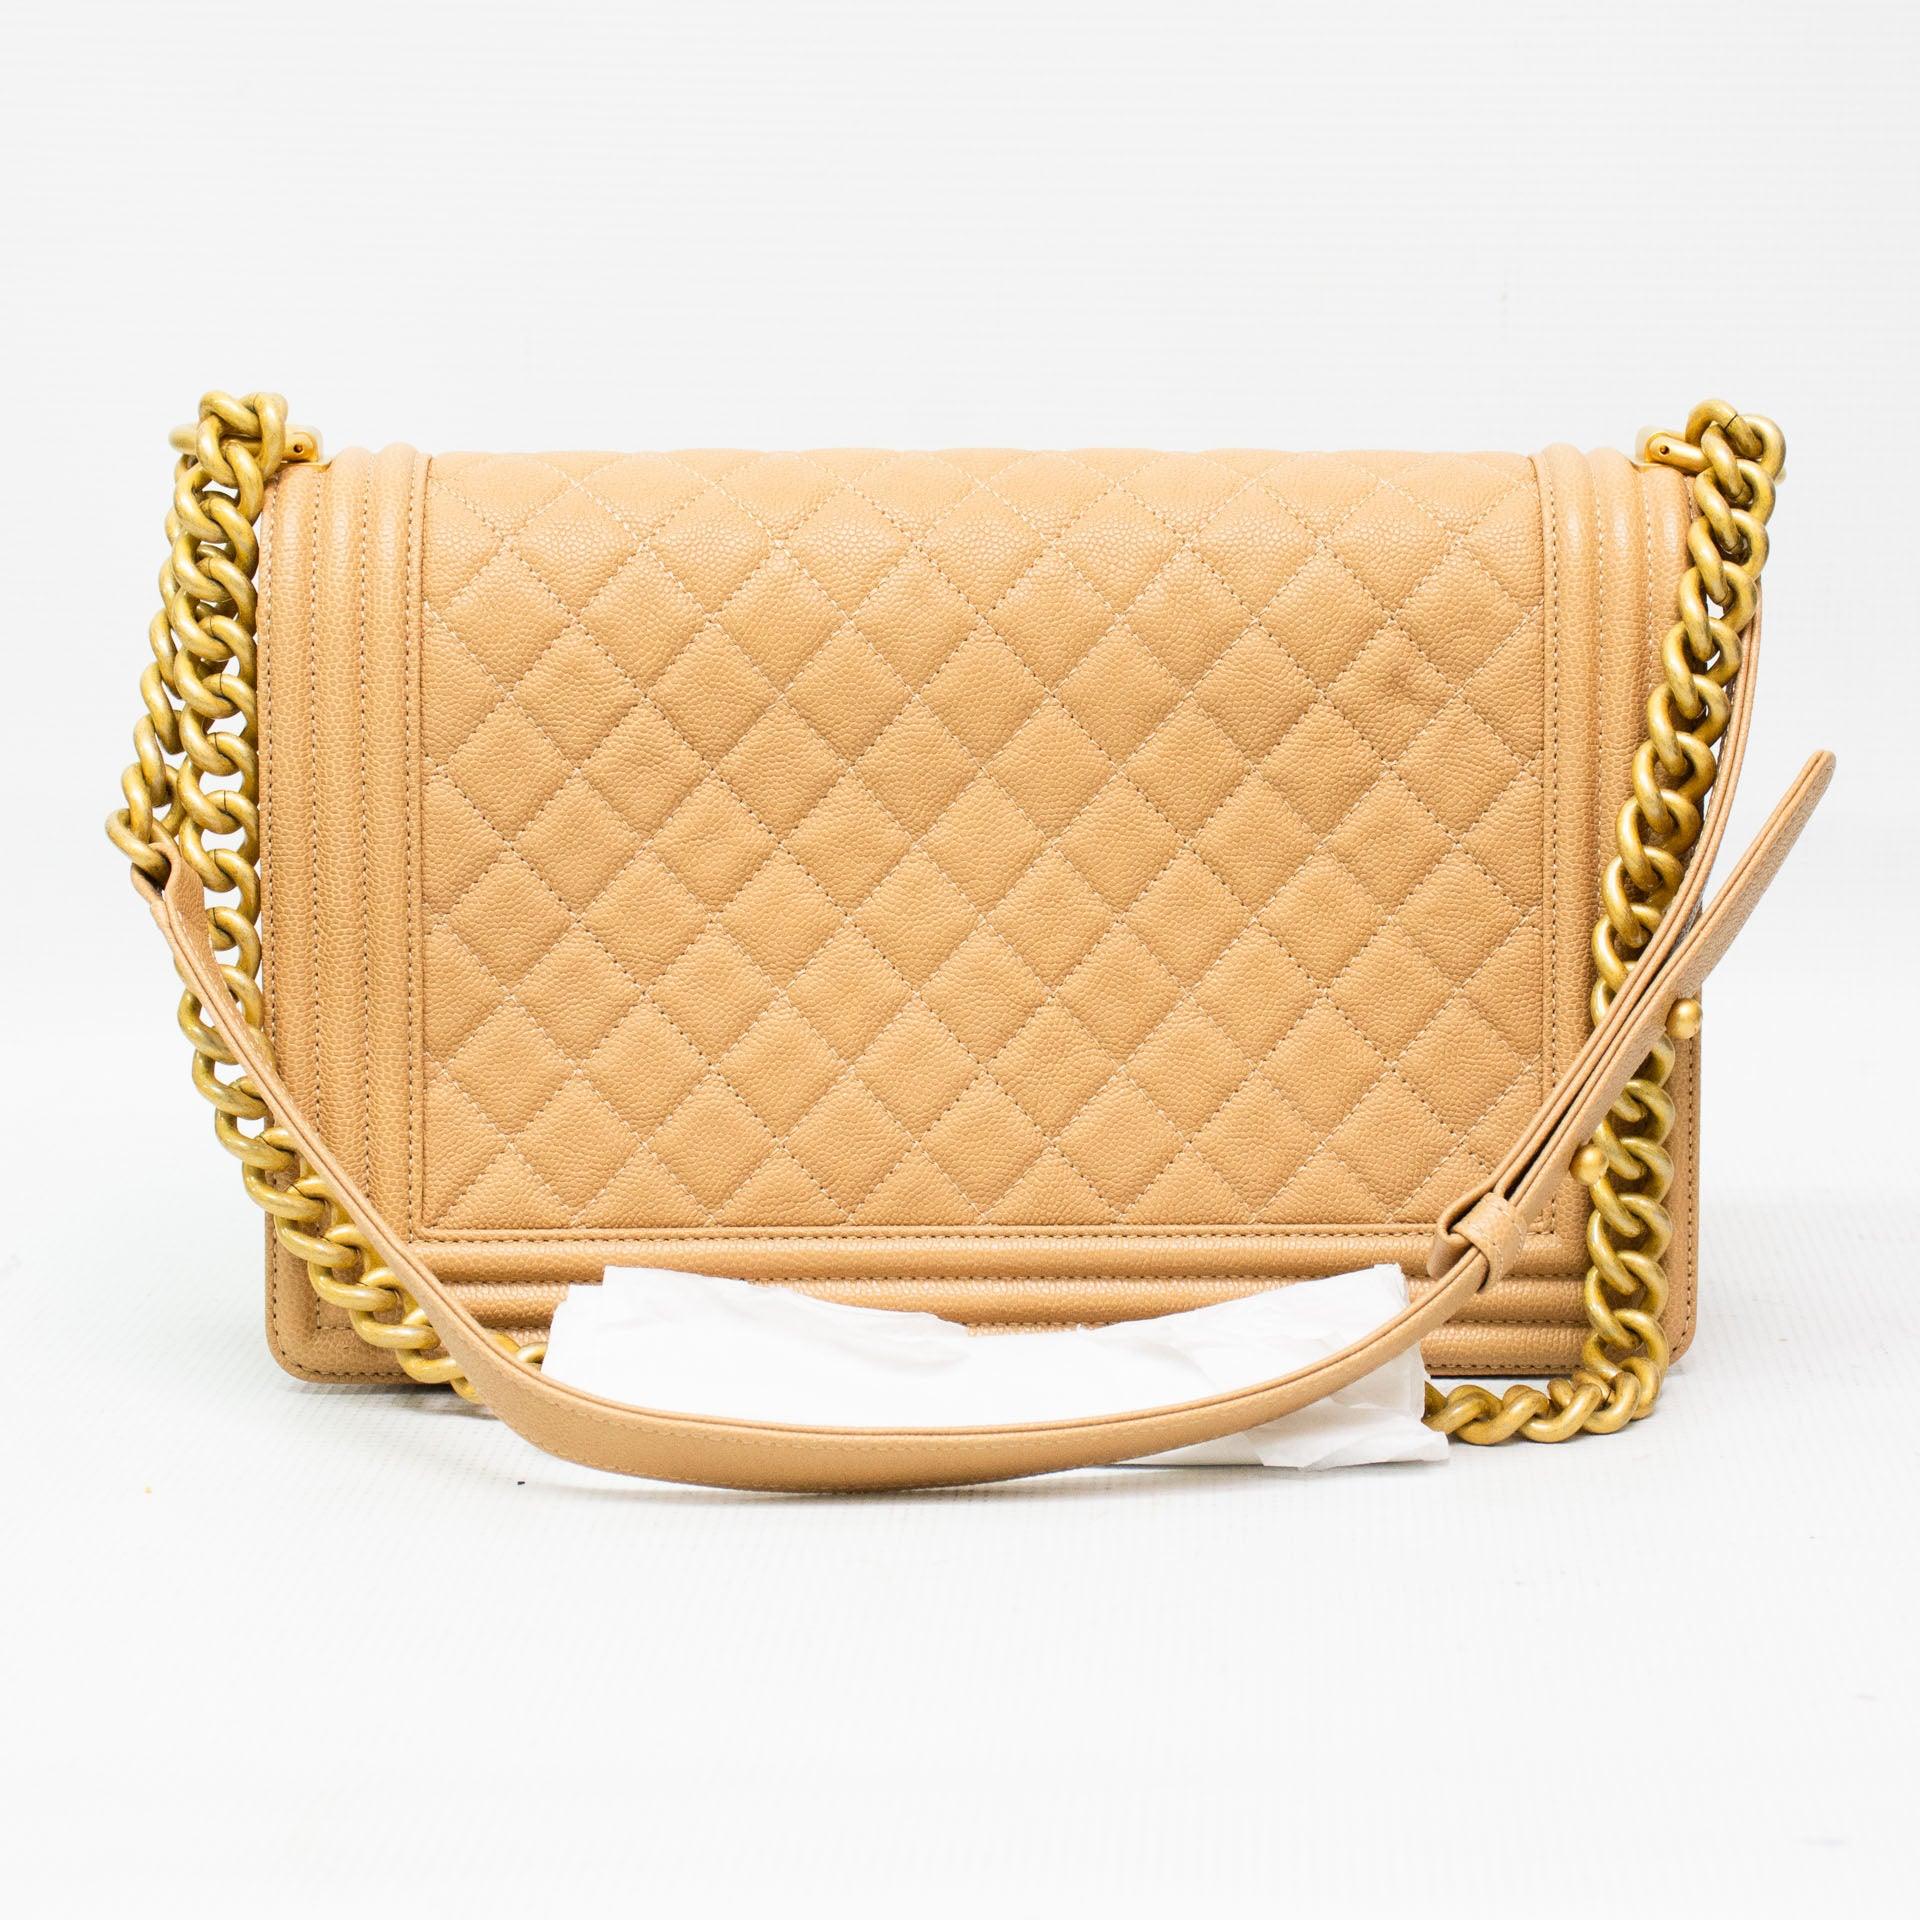 Chanel Beige Quilted Patent Leather Medium Boy Bag